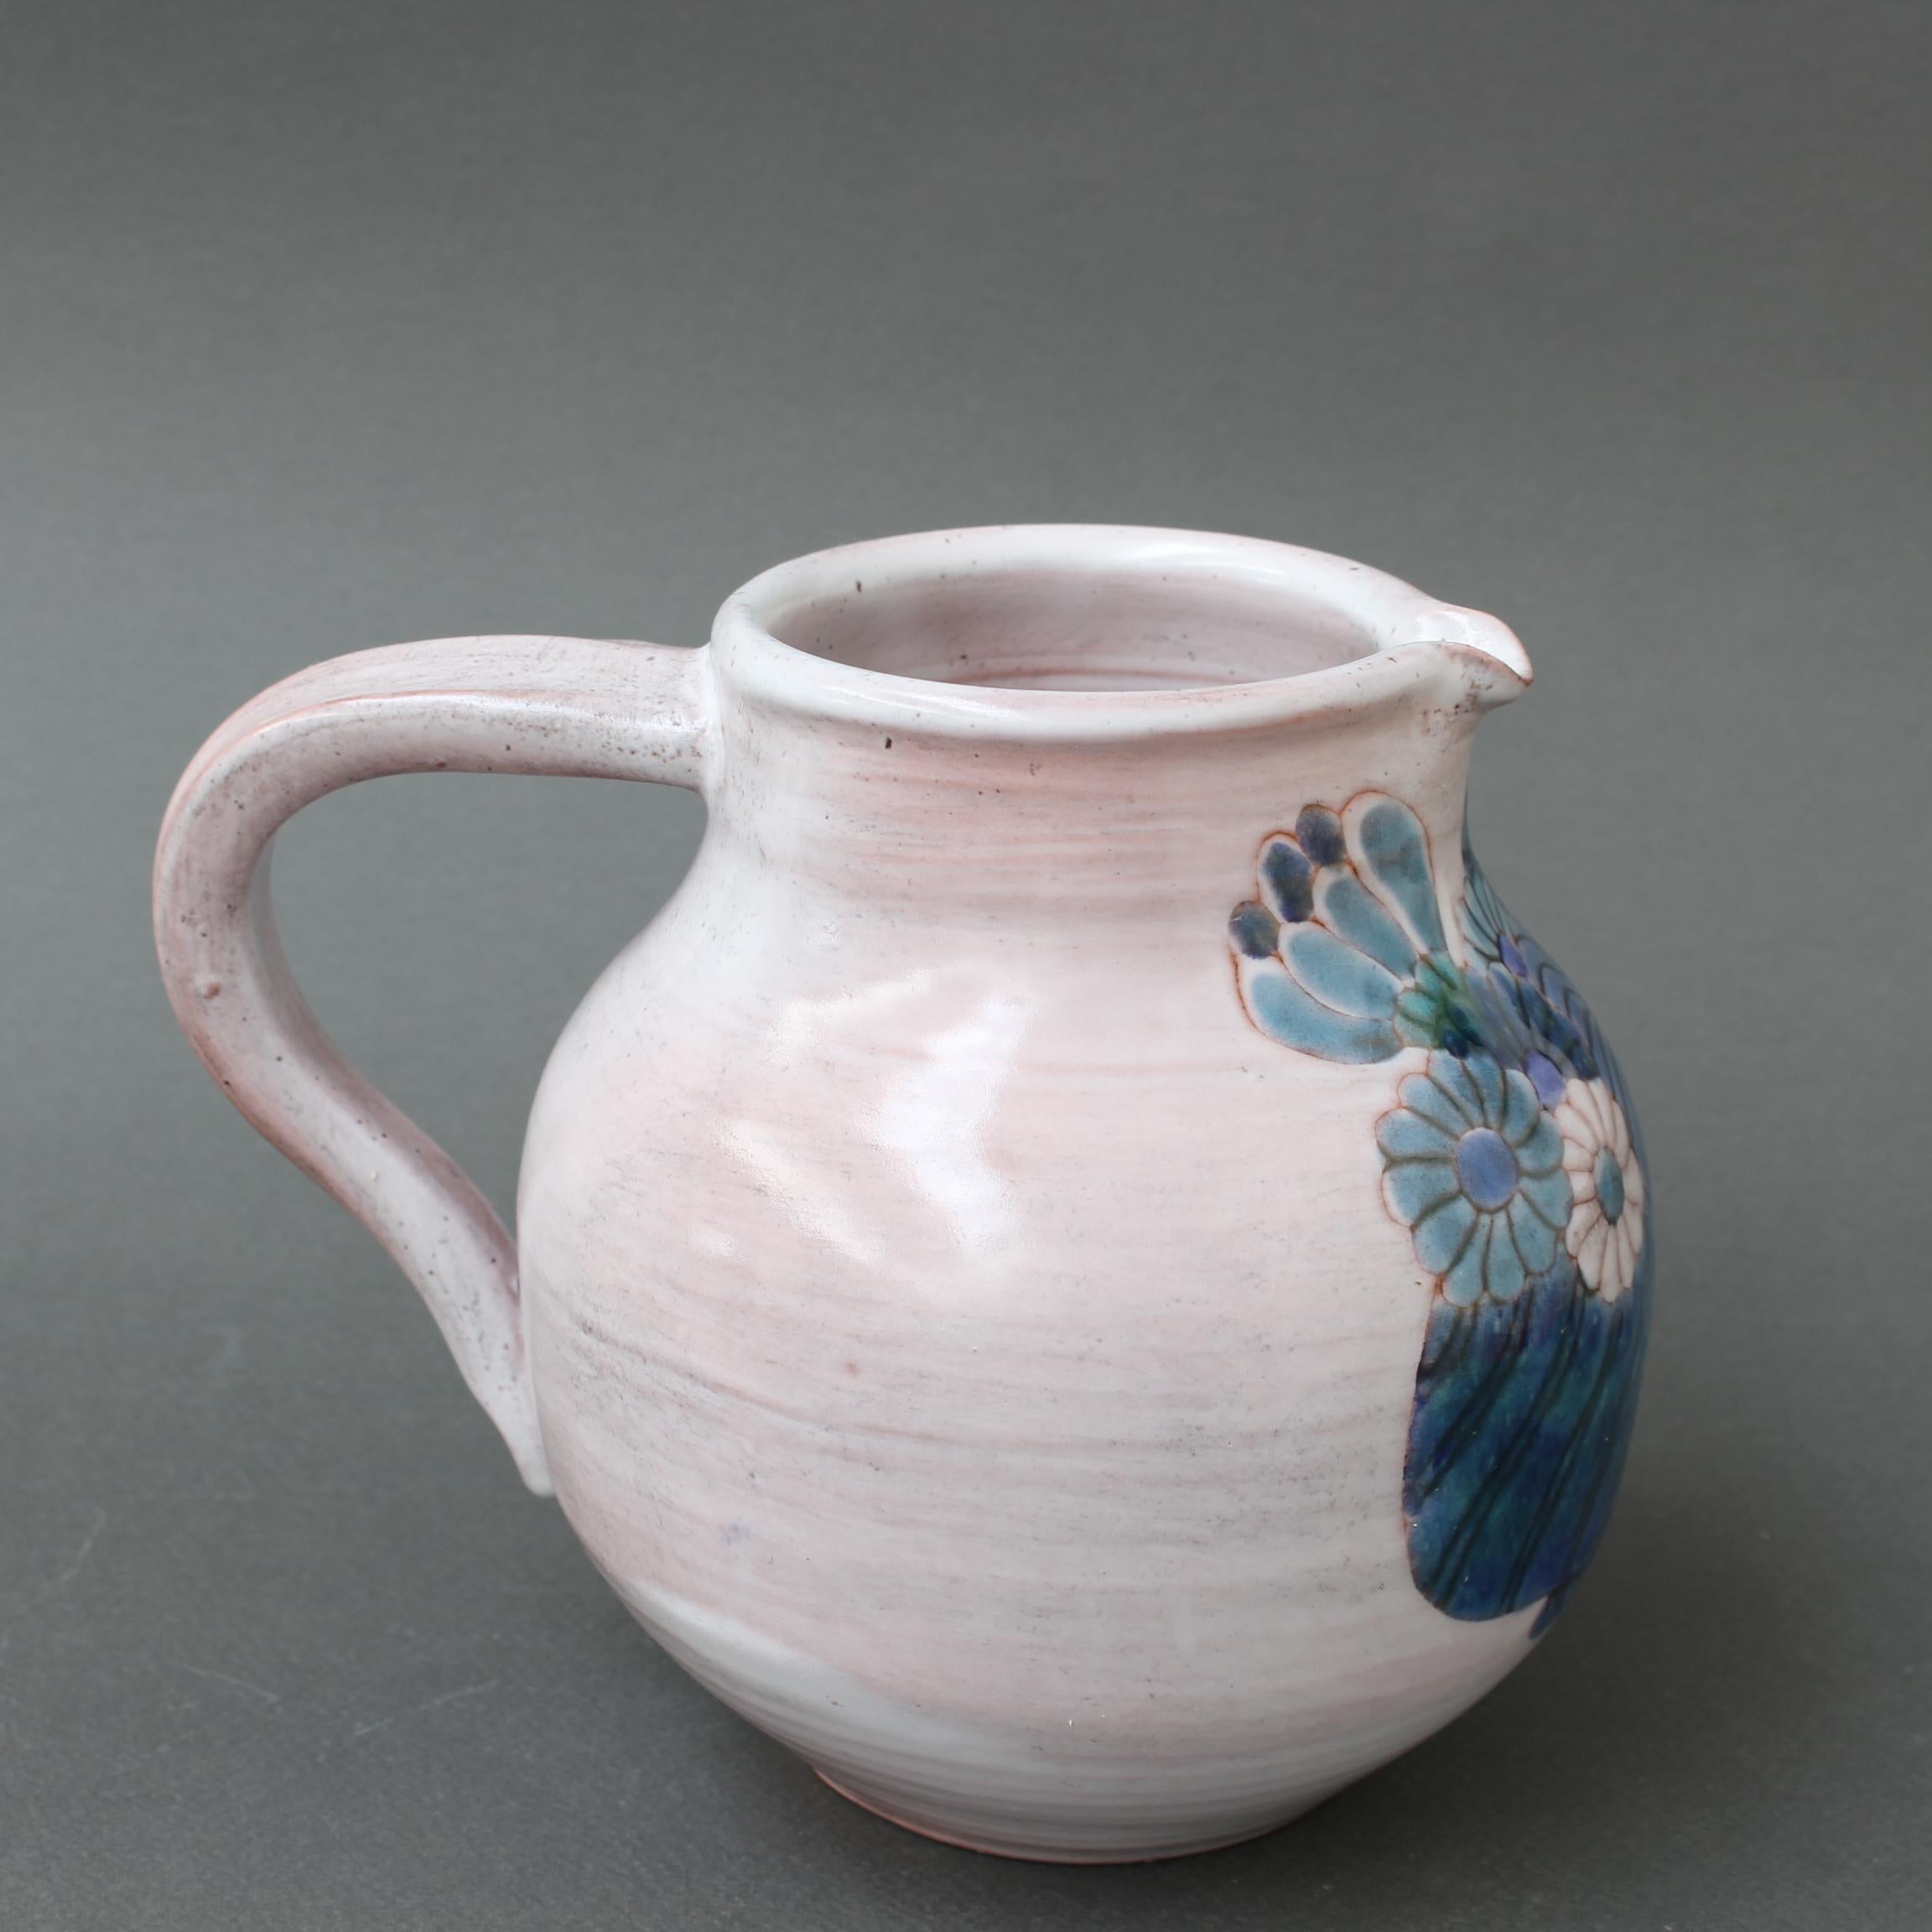 Late 20th Century French Ceramic Pitcher with Flower Motif by the Cloutier Brothers (circa 1970s) For Sale